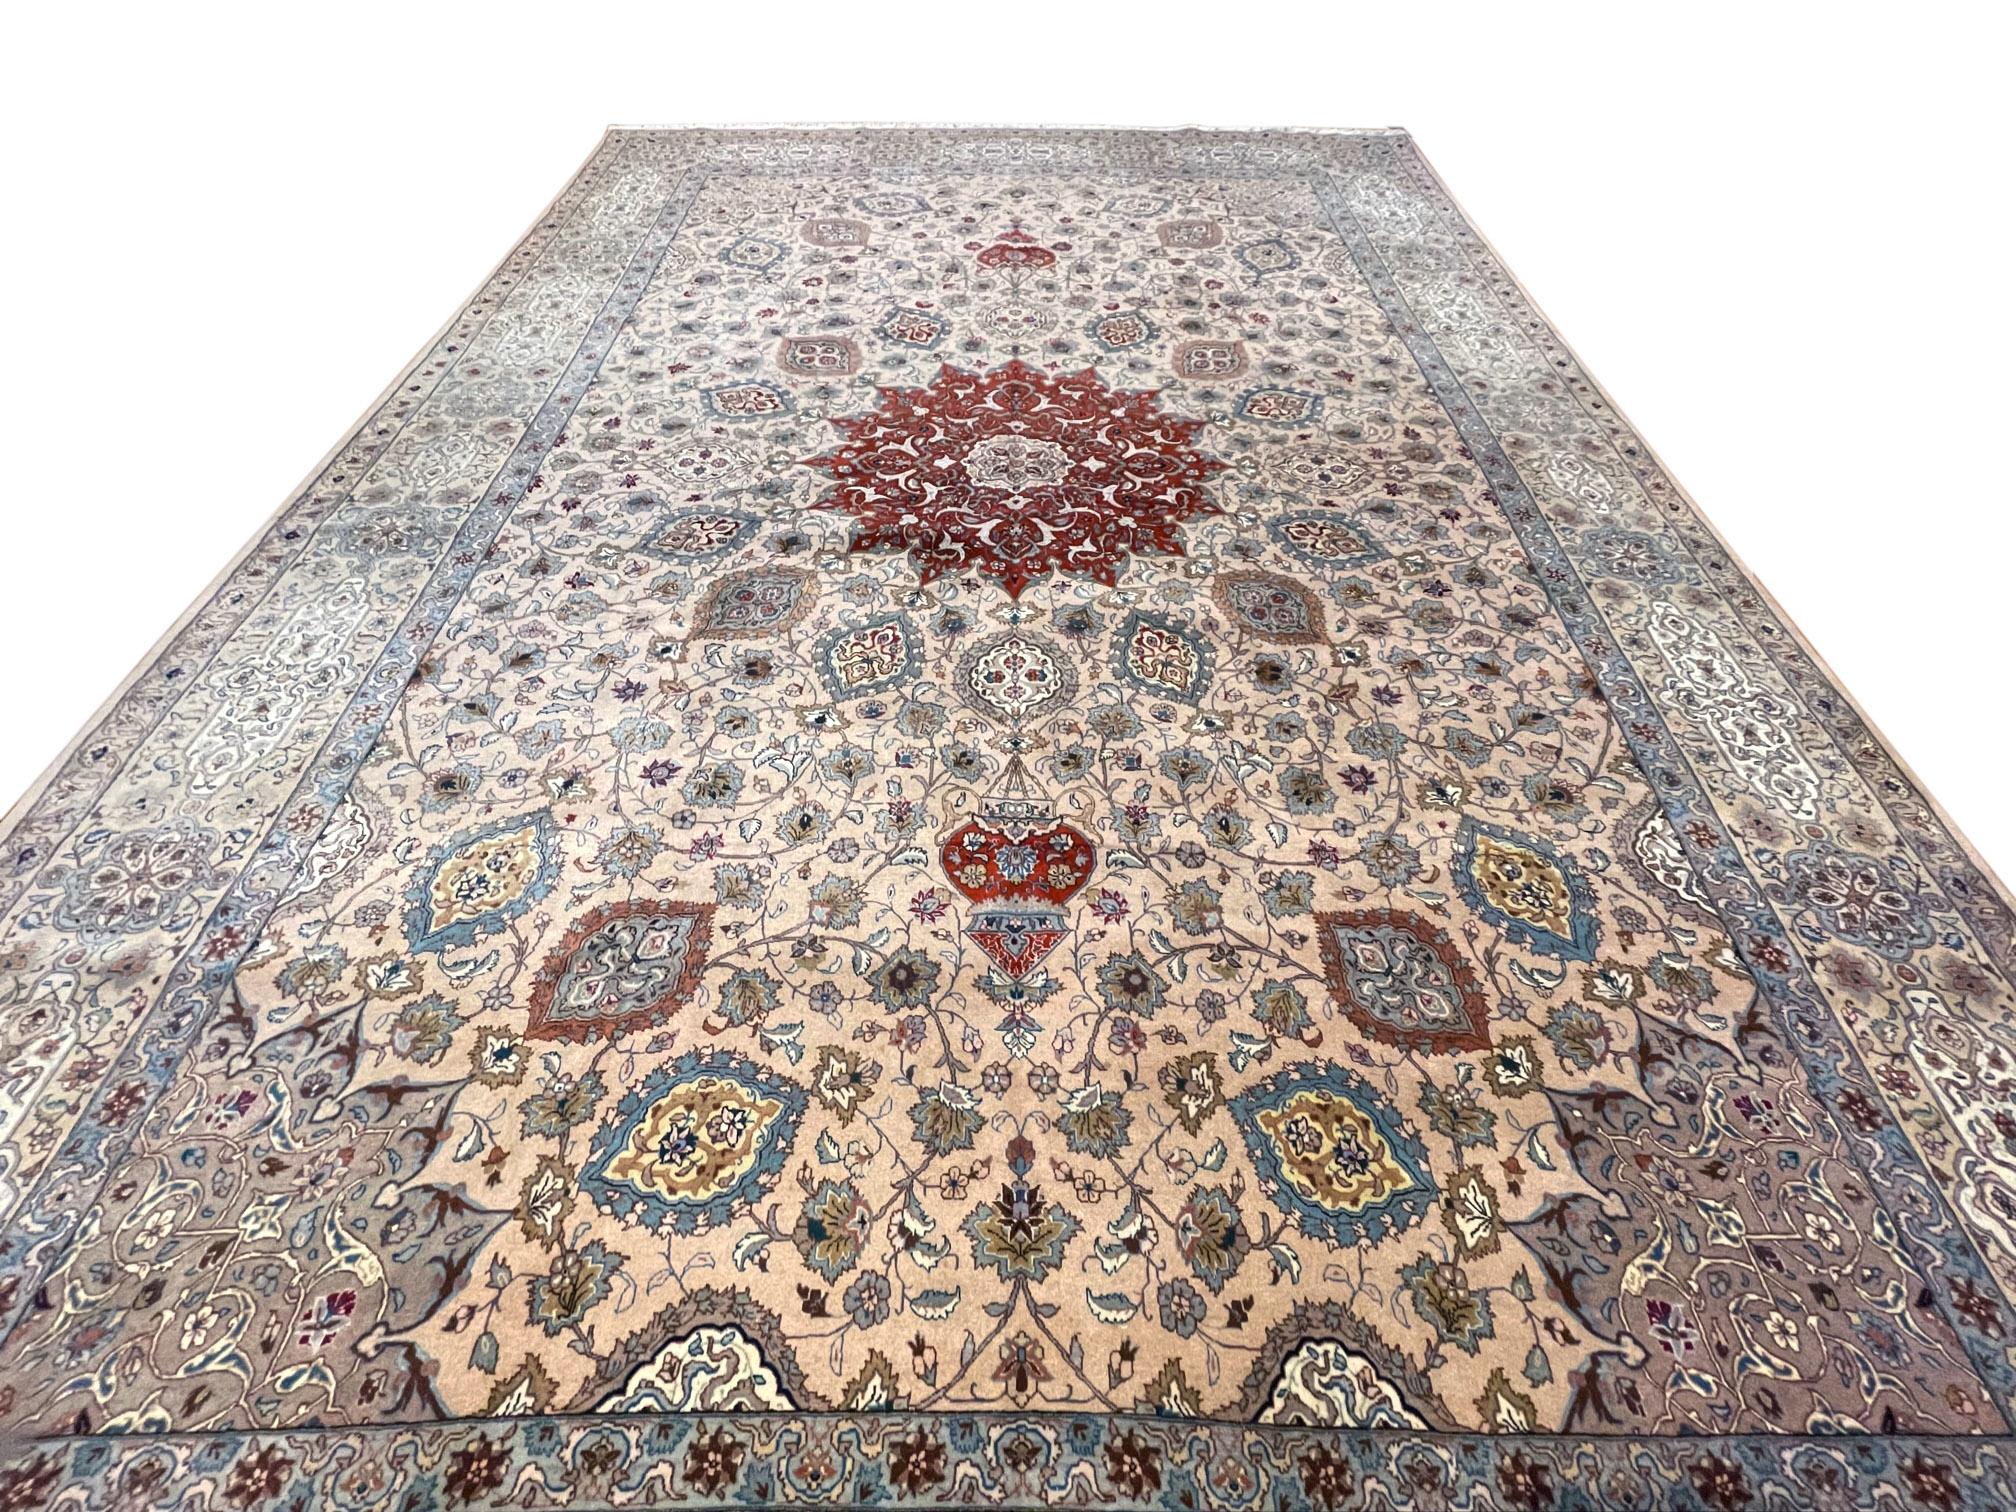 Authentic Persian Hand Knotted Floral Sheikh Safi Design Tabriz Rug, 1970 For Sale 8